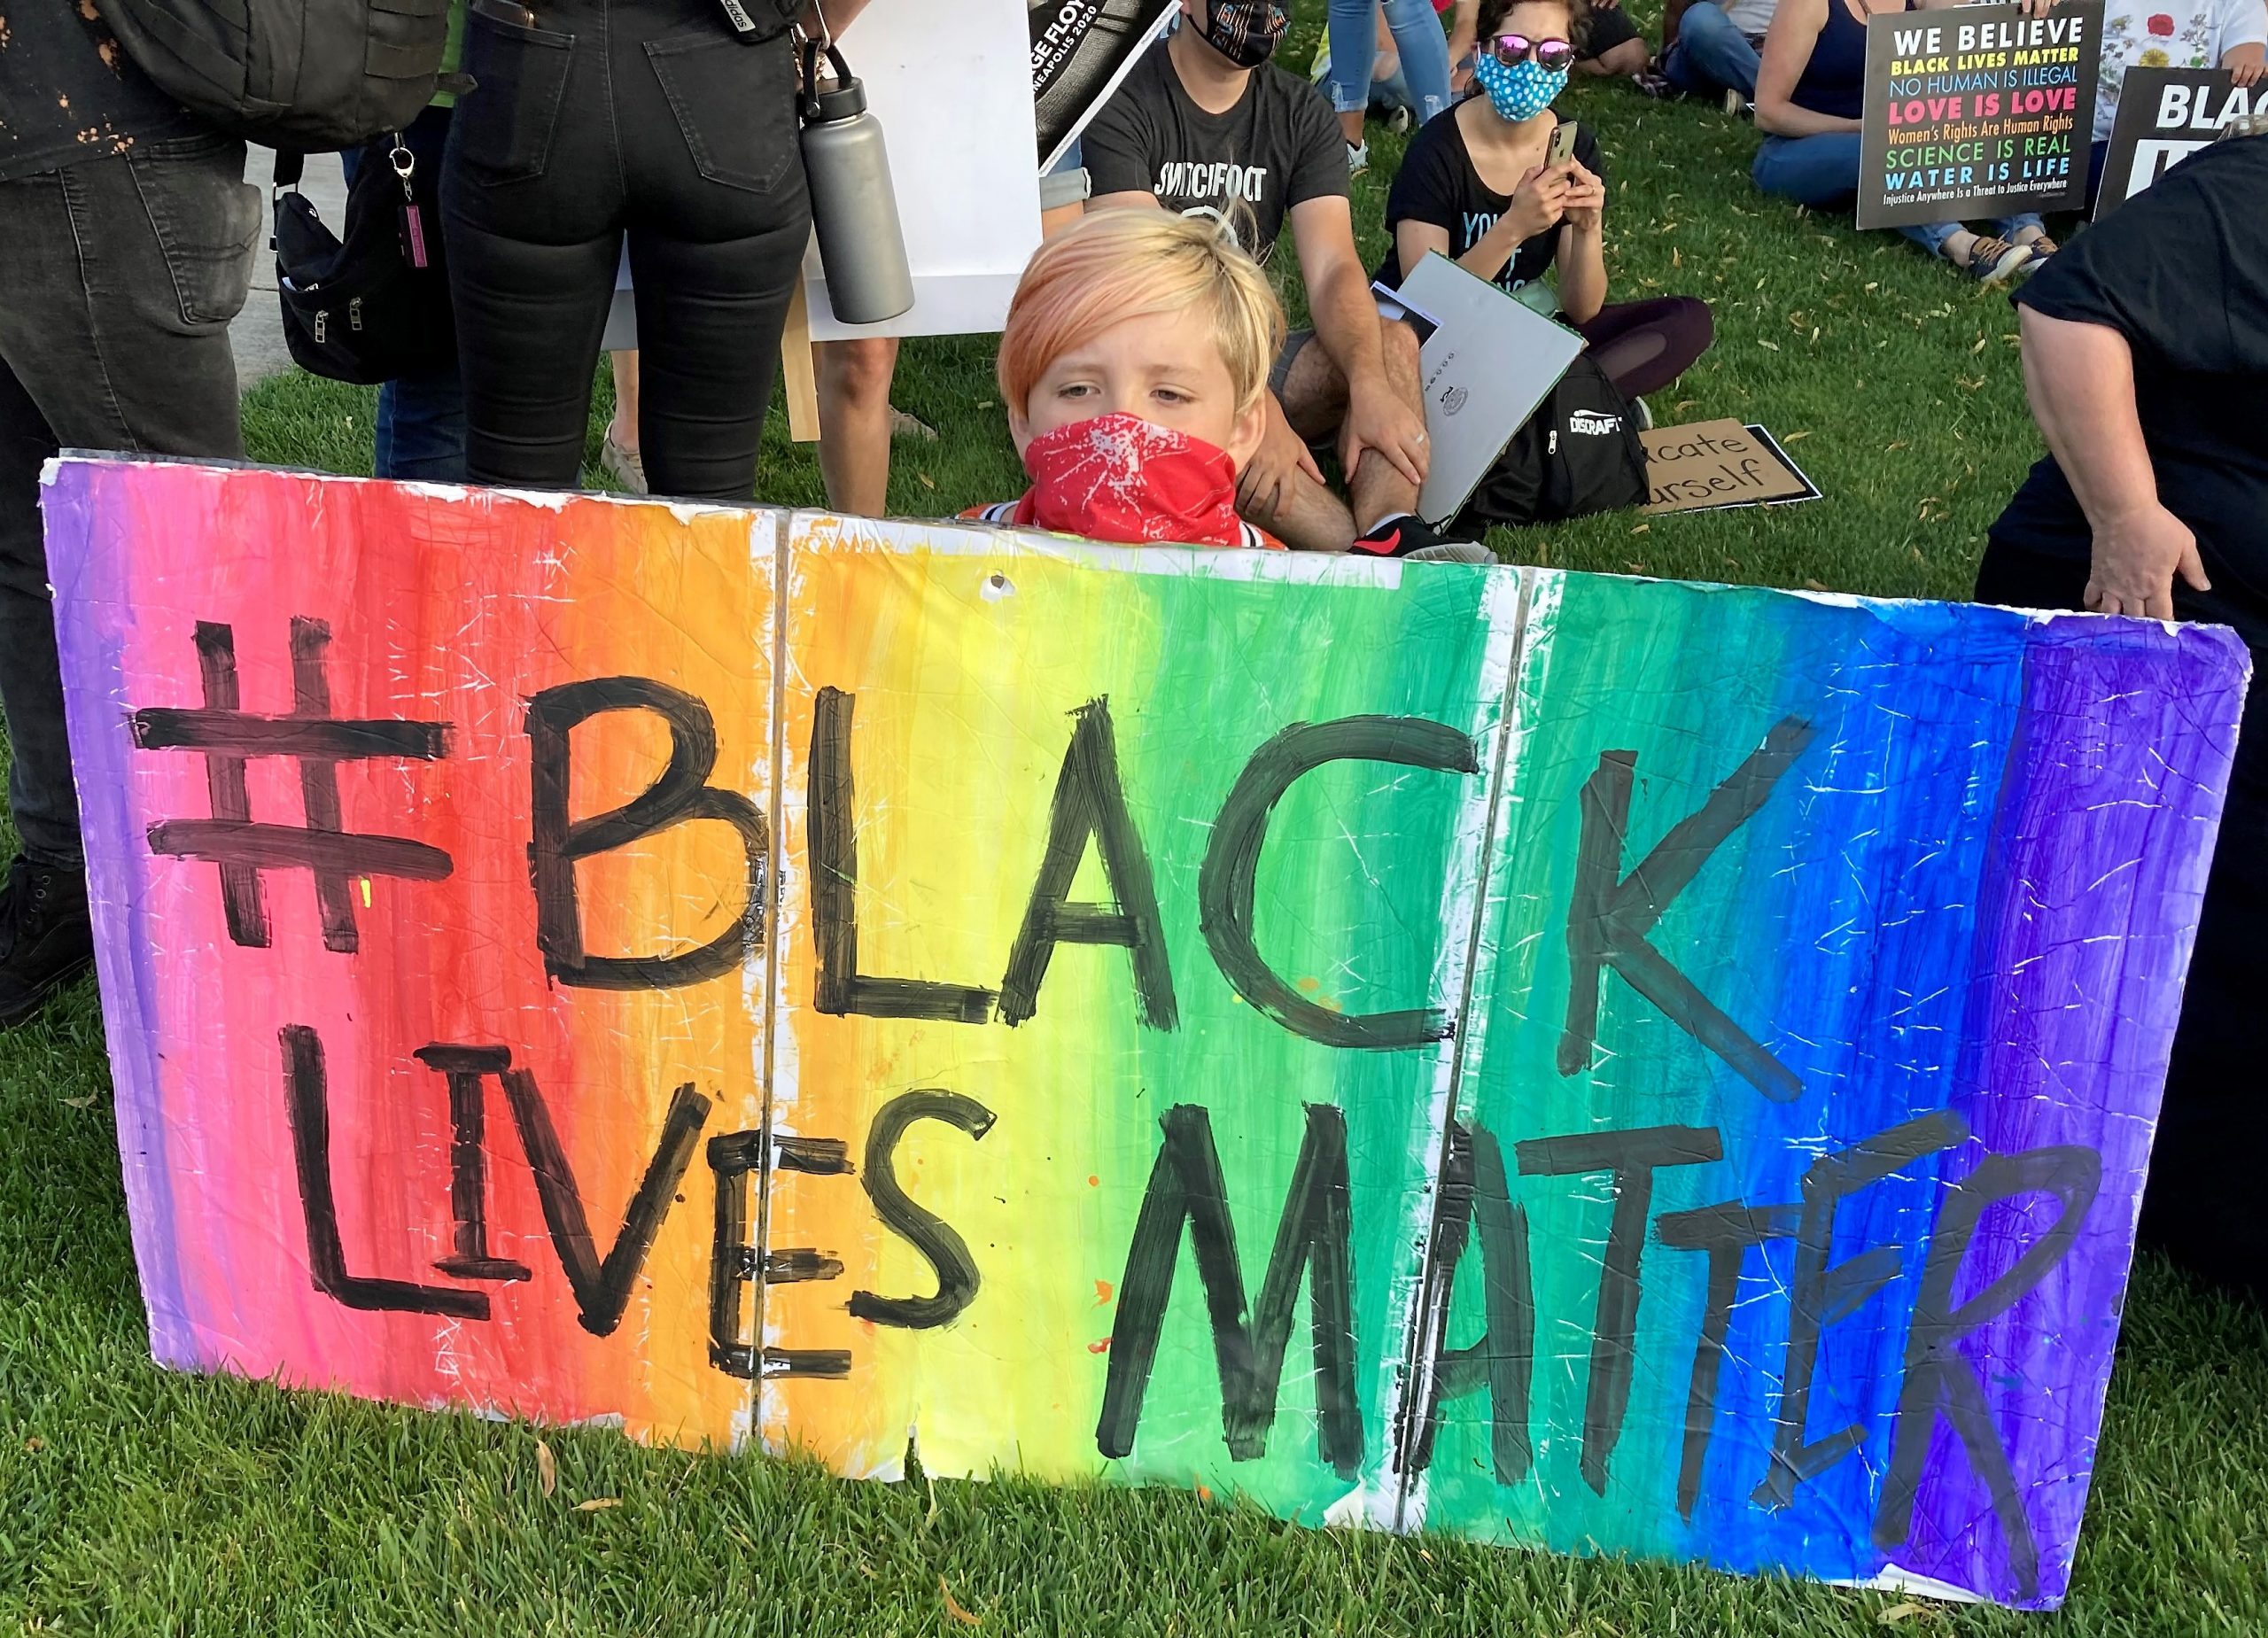 Young person from Milwaukie UCC with Black Lives Matter sign, 8/28/20